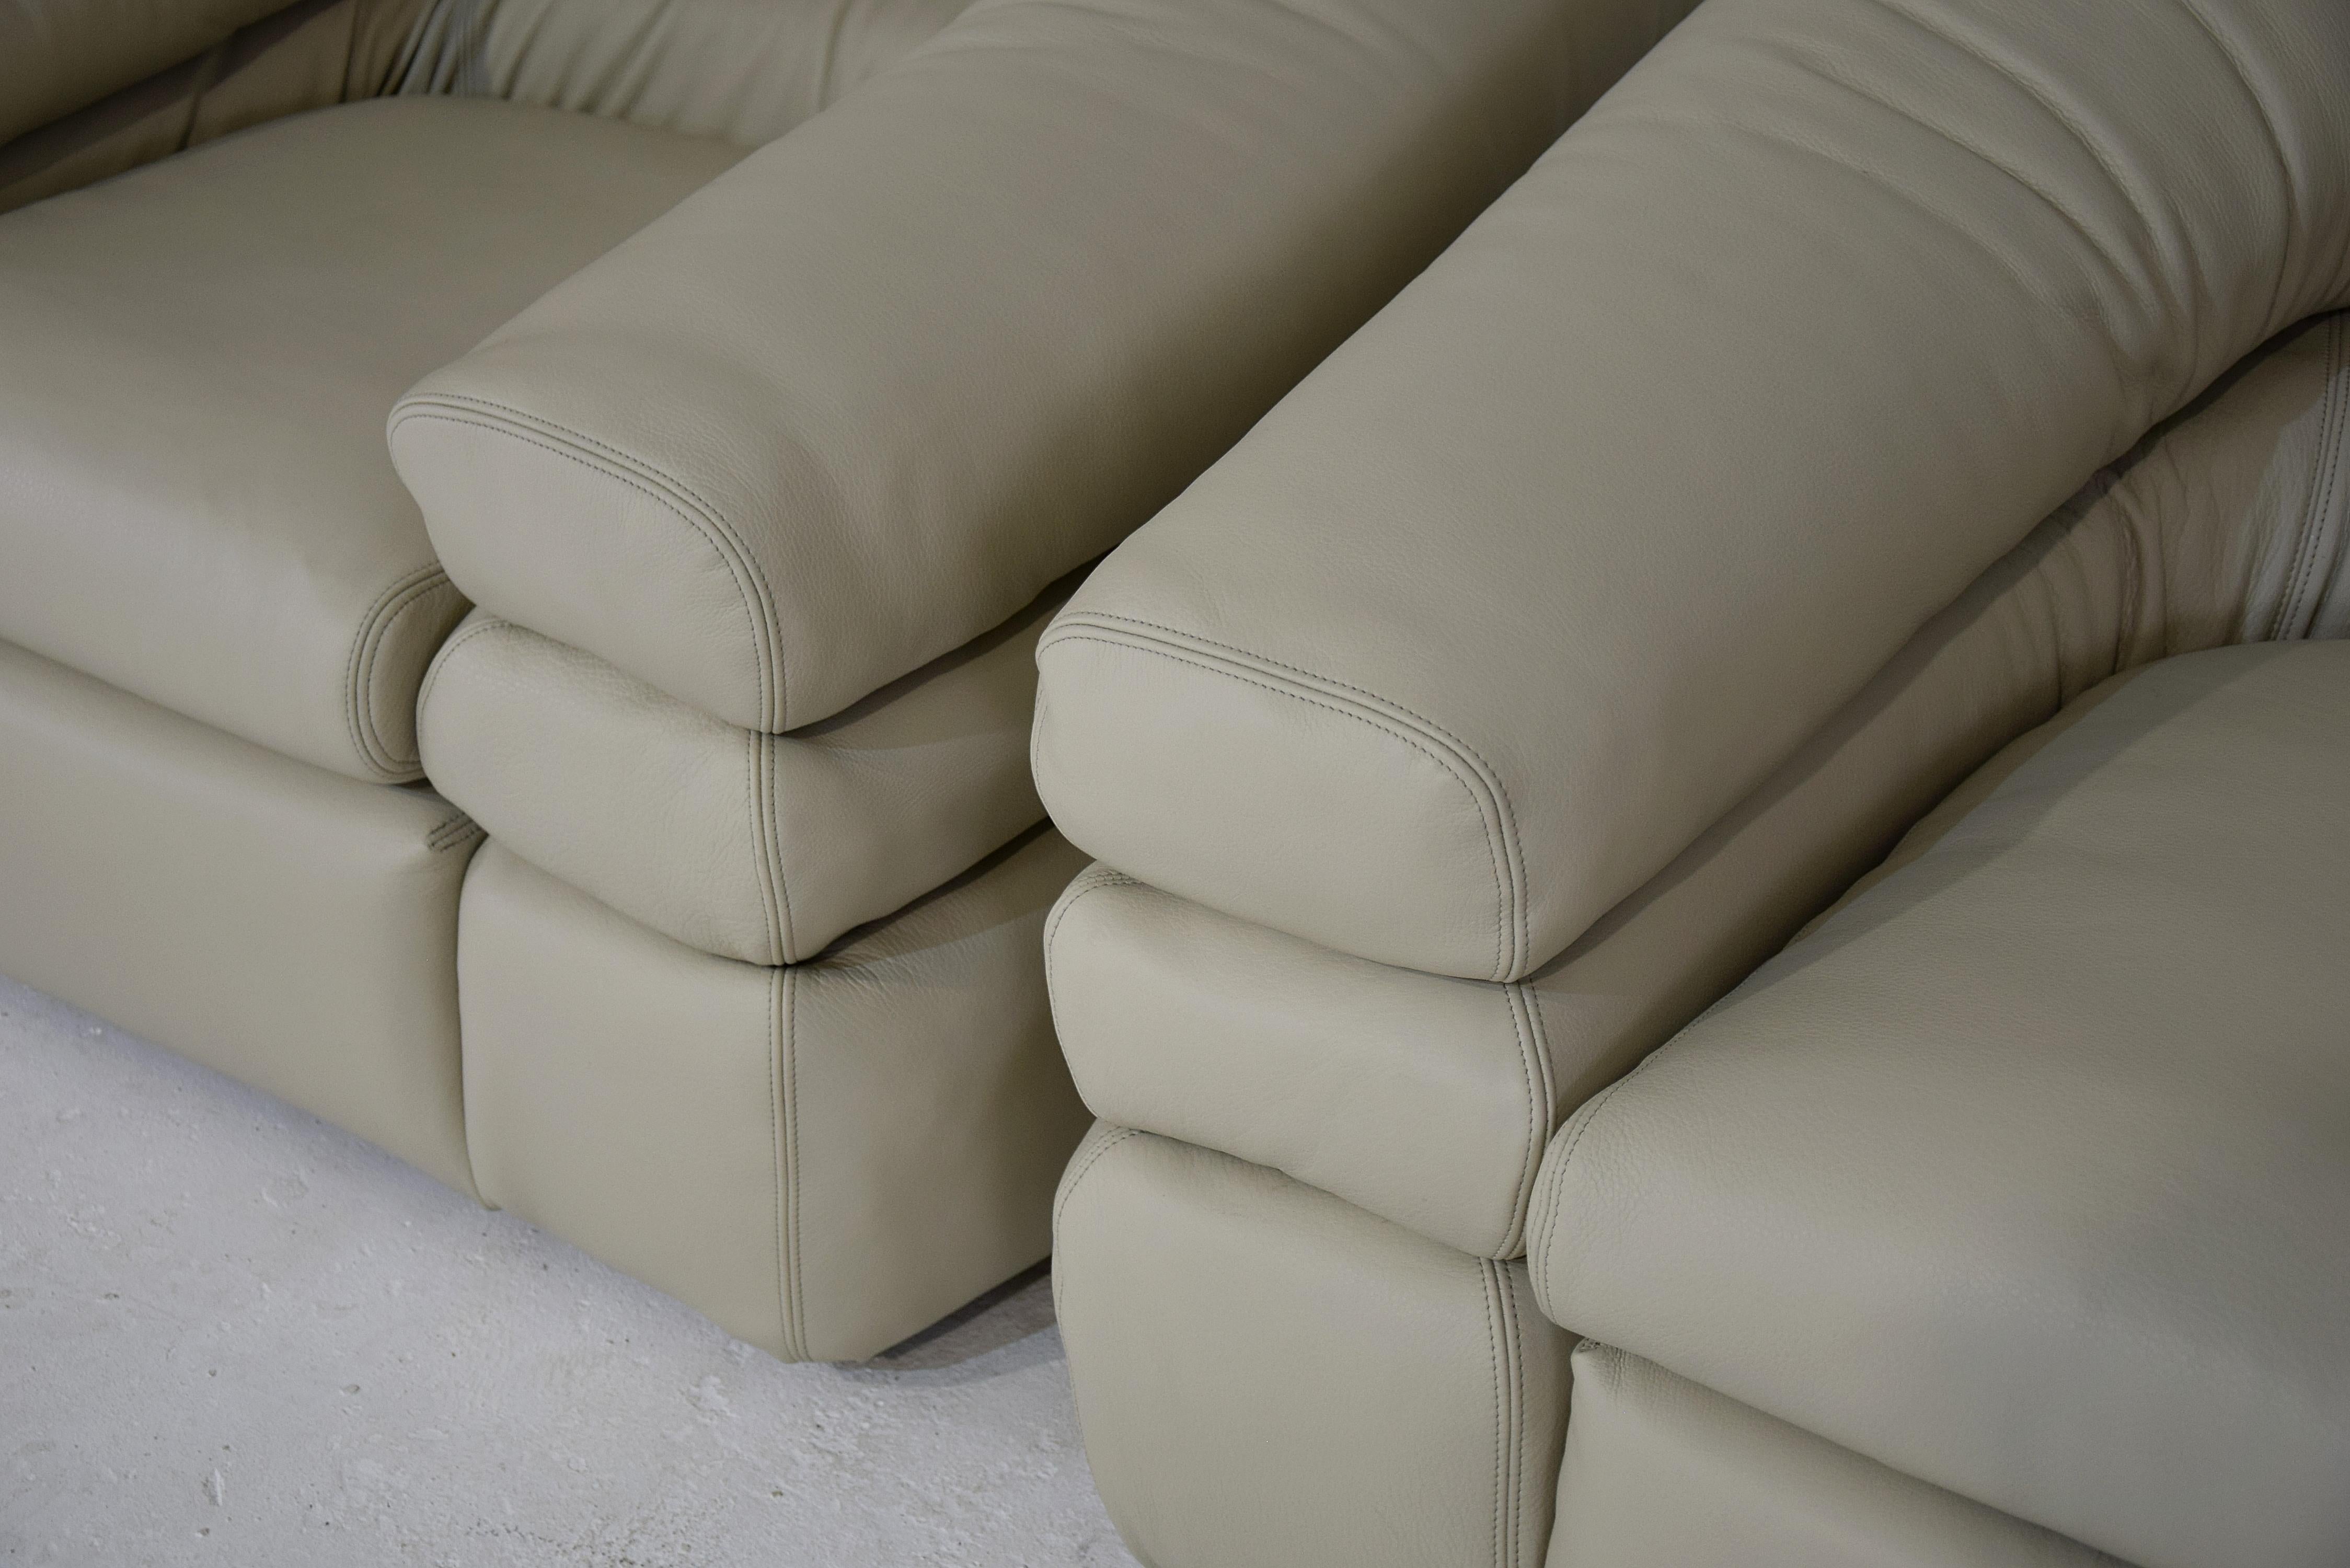 Gorgeous and stylish pair of re-upholstered Straccio Ivory full grain leather arm chairs designed by De Pas, D'Urbino and Lomazzi for Zanotta in 1968.
Rather than wearing out, full grain leather develops a patina during its useful lifetime. It is